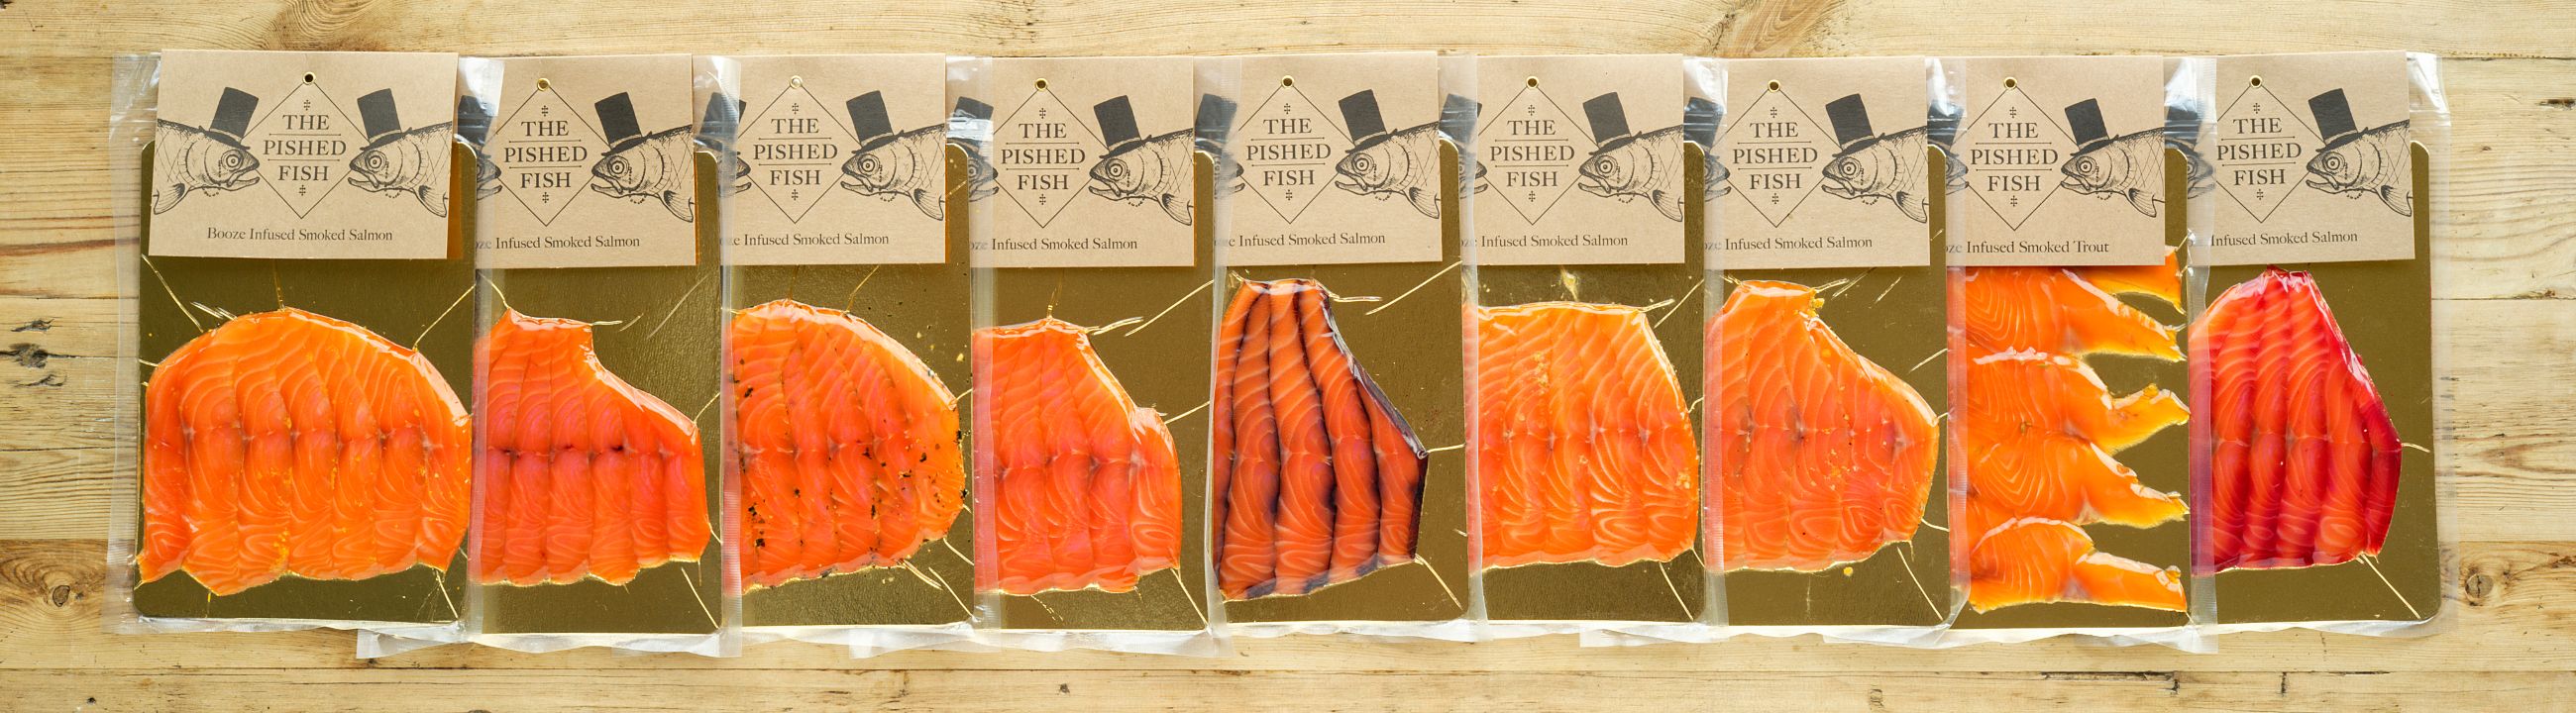 All Smoked Salmon Flavours